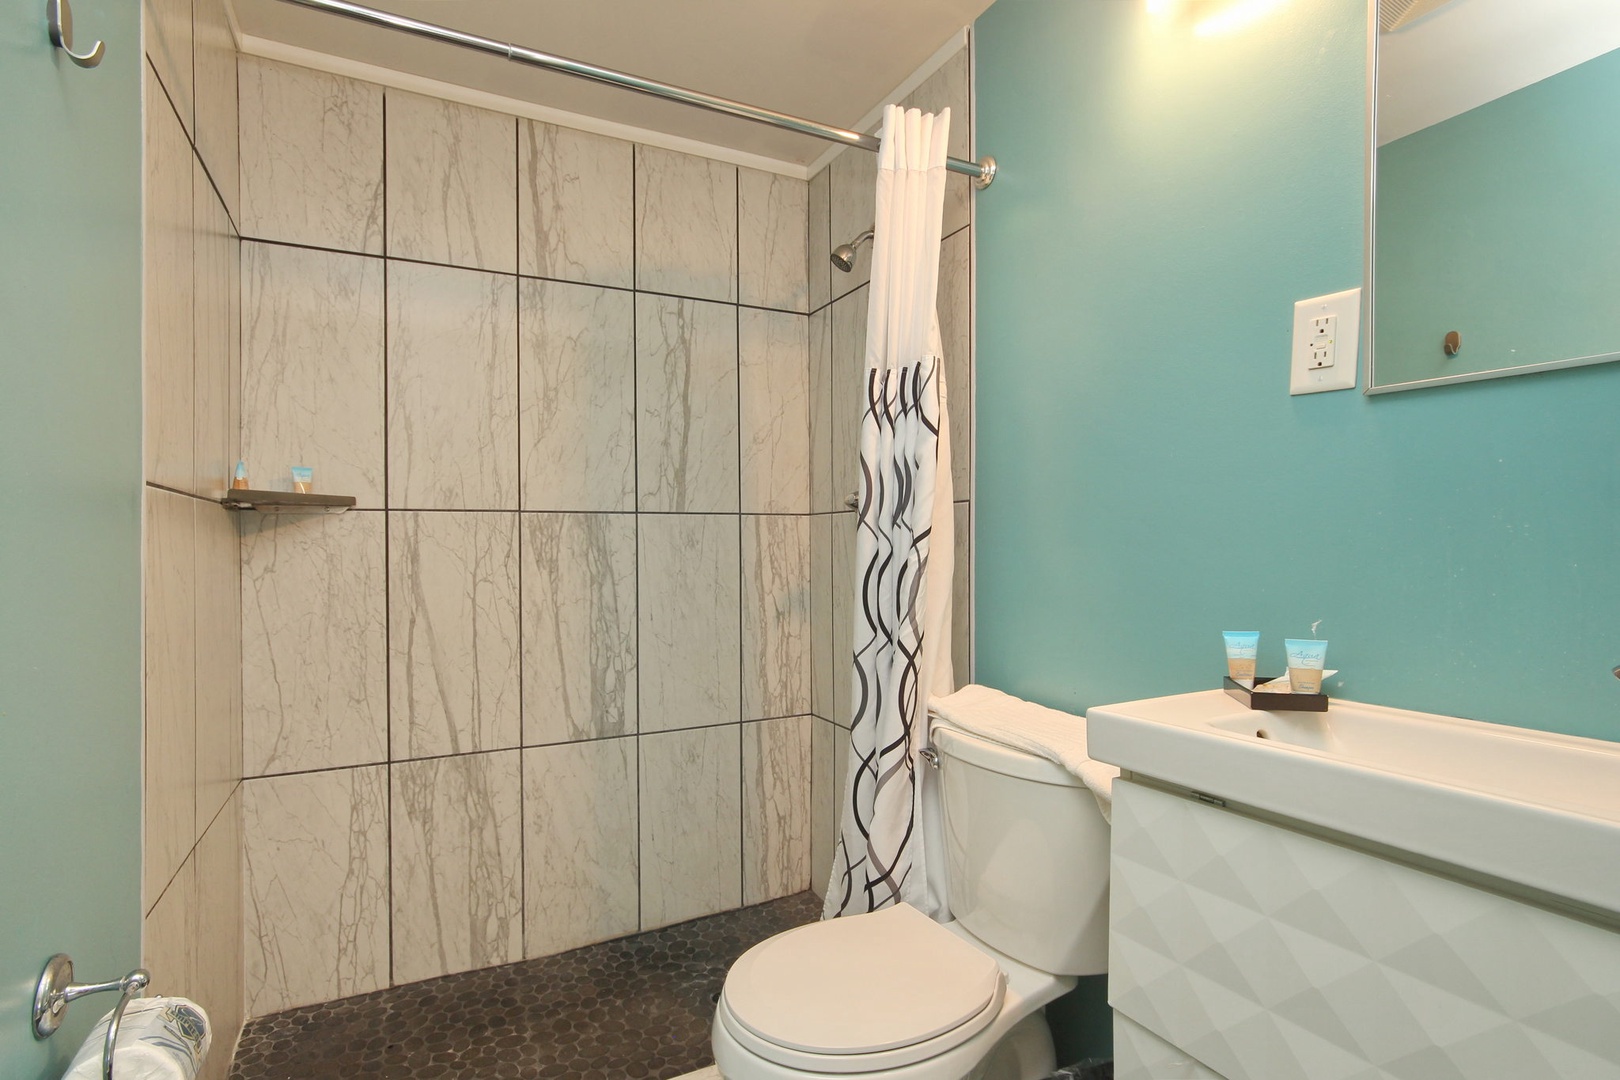 Refresh and rejuvenate in the clean, well-appointed bathroom